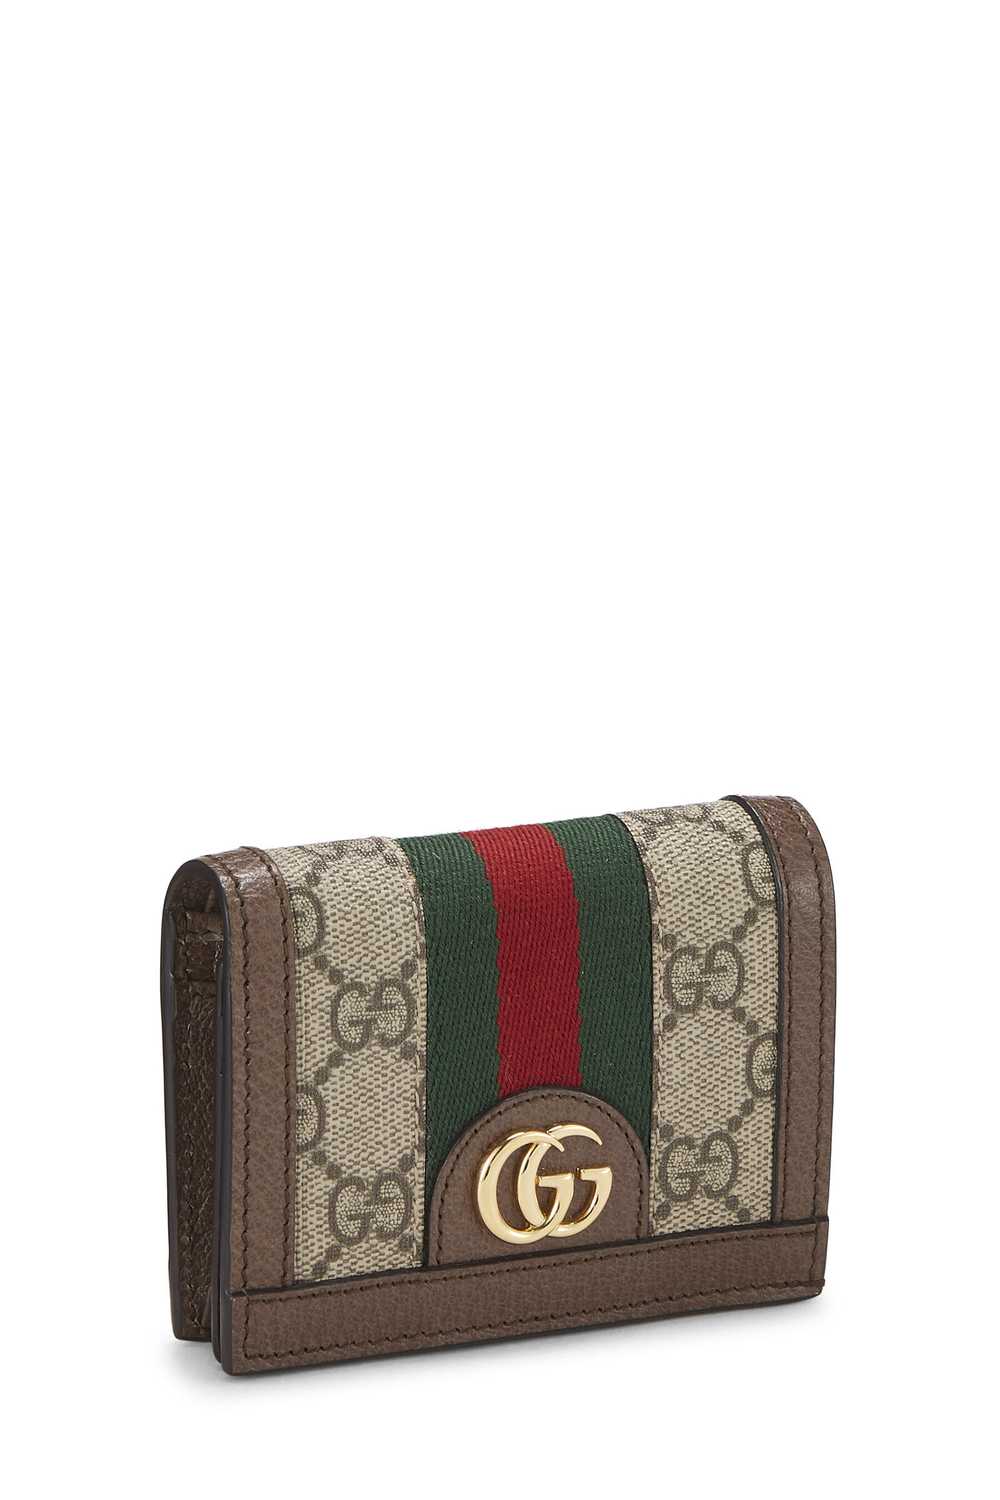 Original GG Supreme Canvas Ophidia French Wallet - image 2